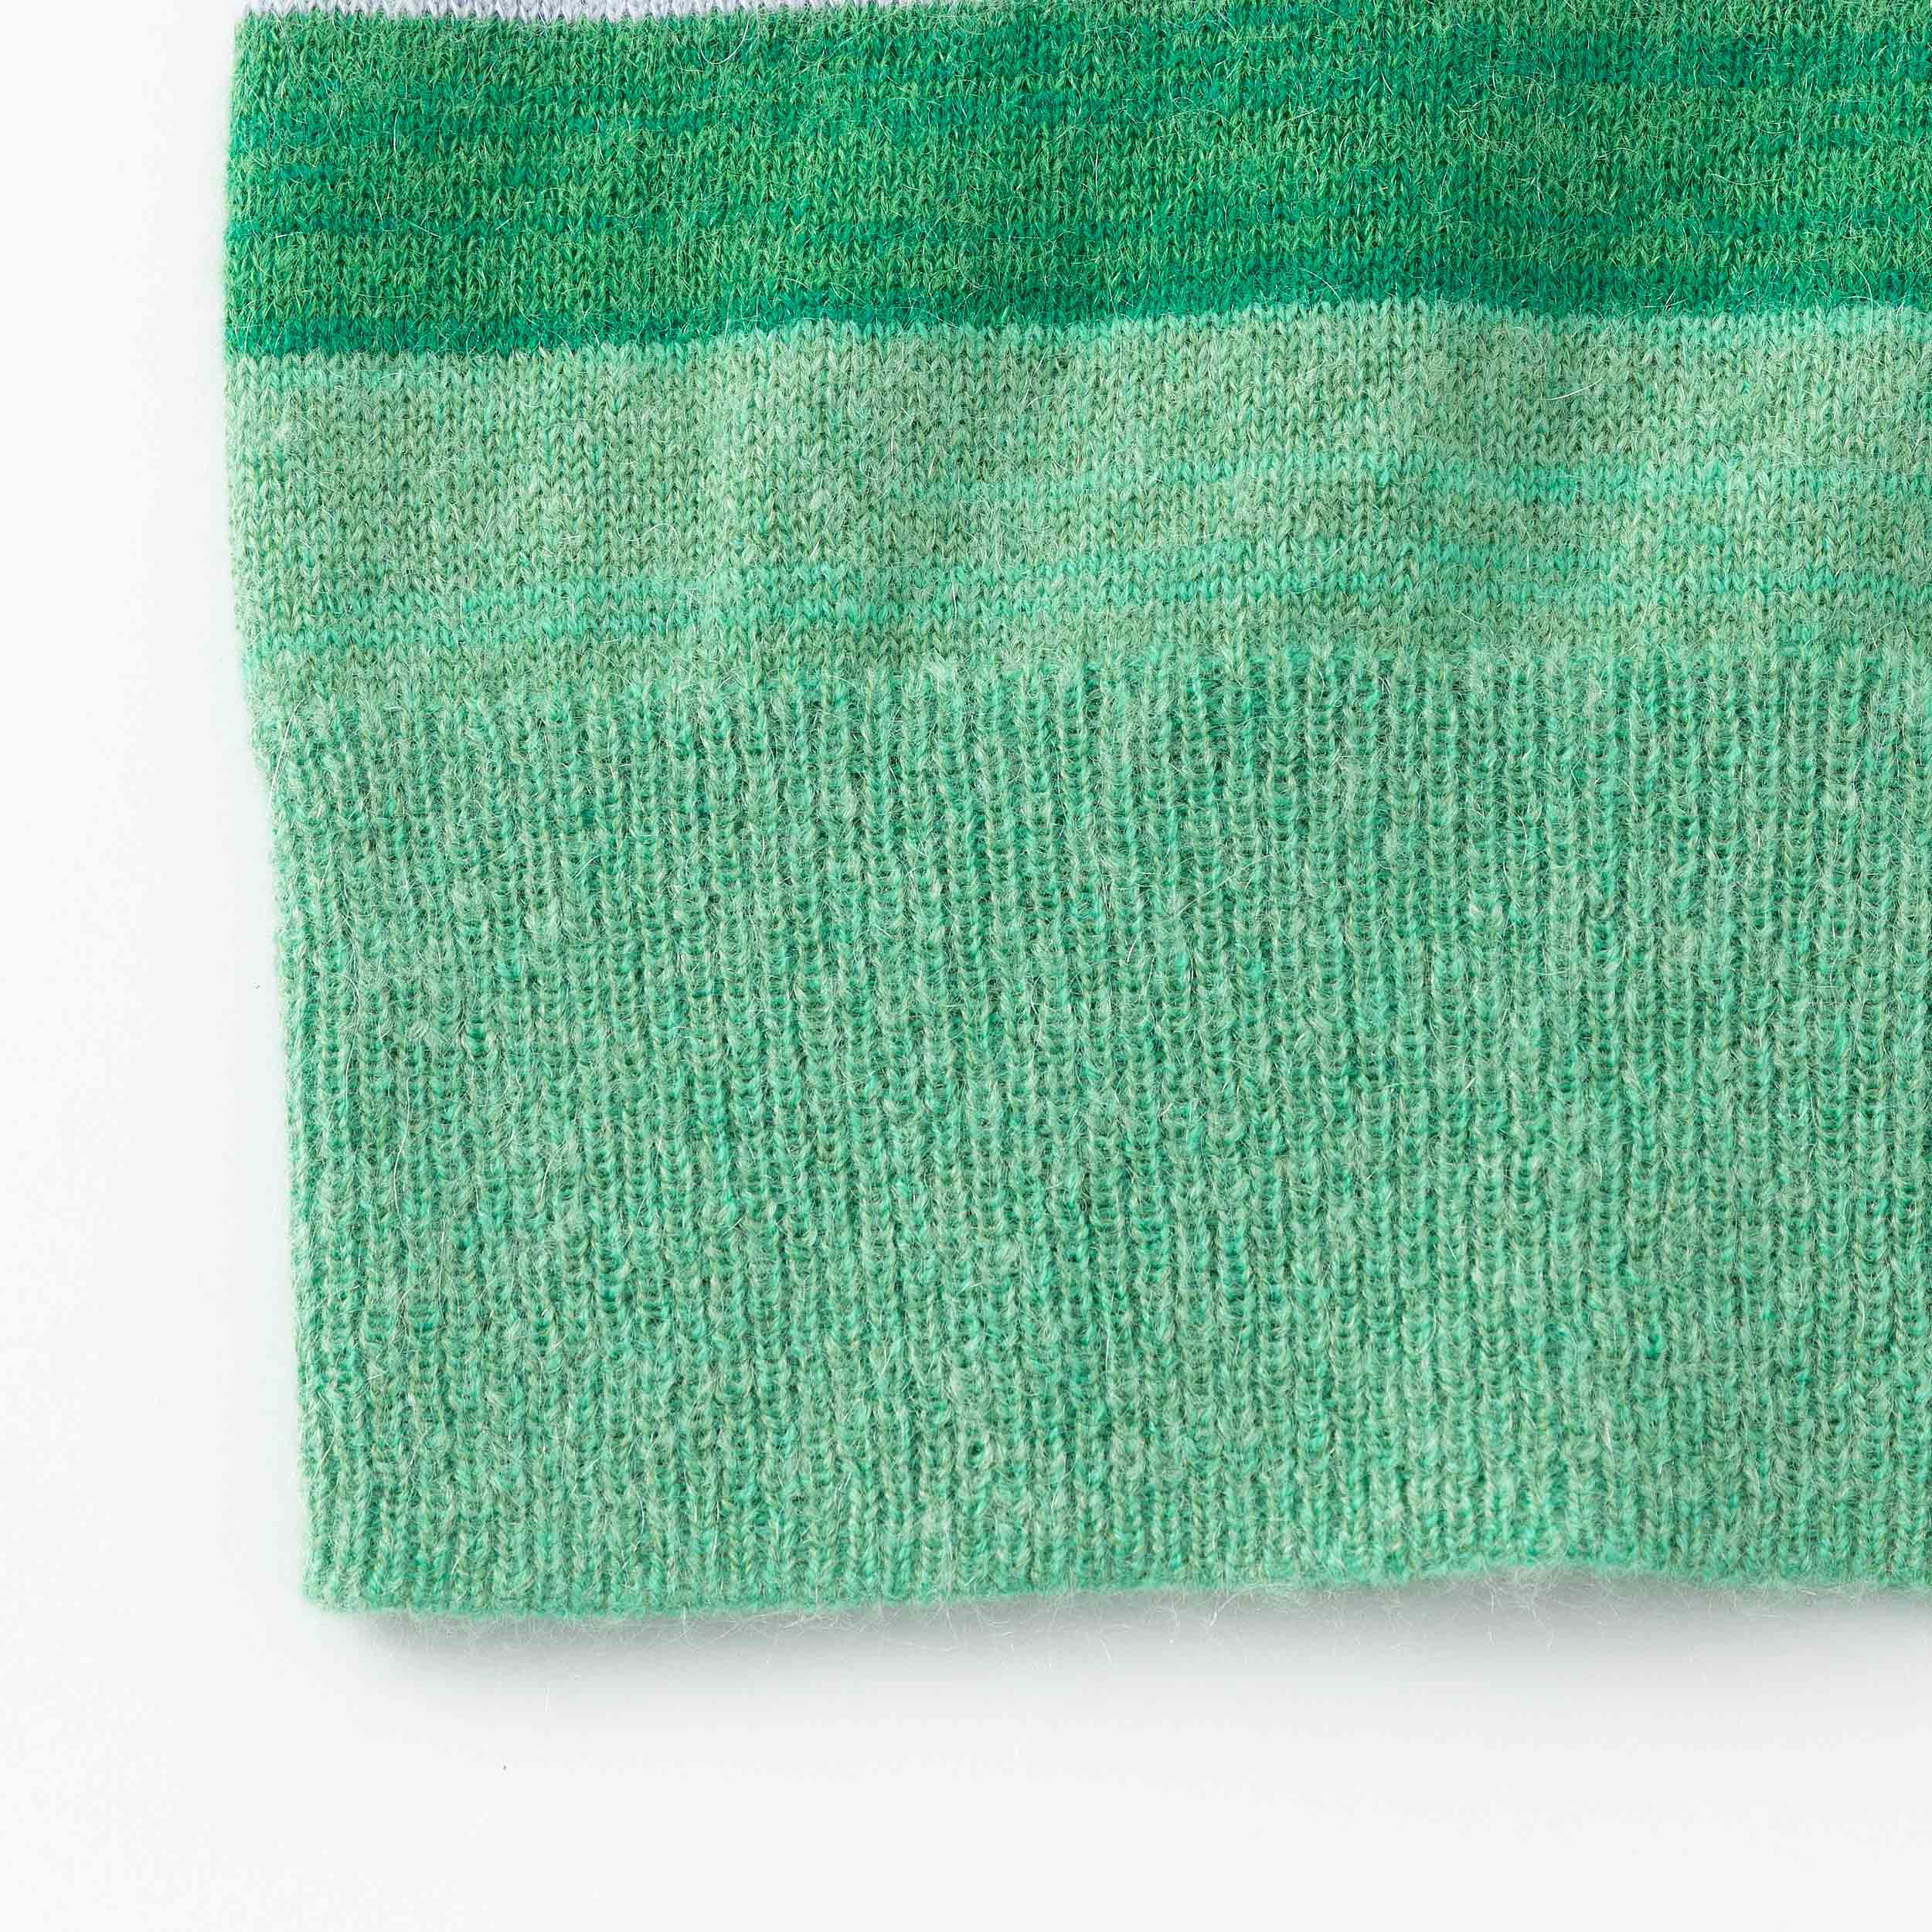 N.118 CASHMERE BLEND MULTI-STRIPE MOHAIR CREW - ABSENTHE - XS, S left